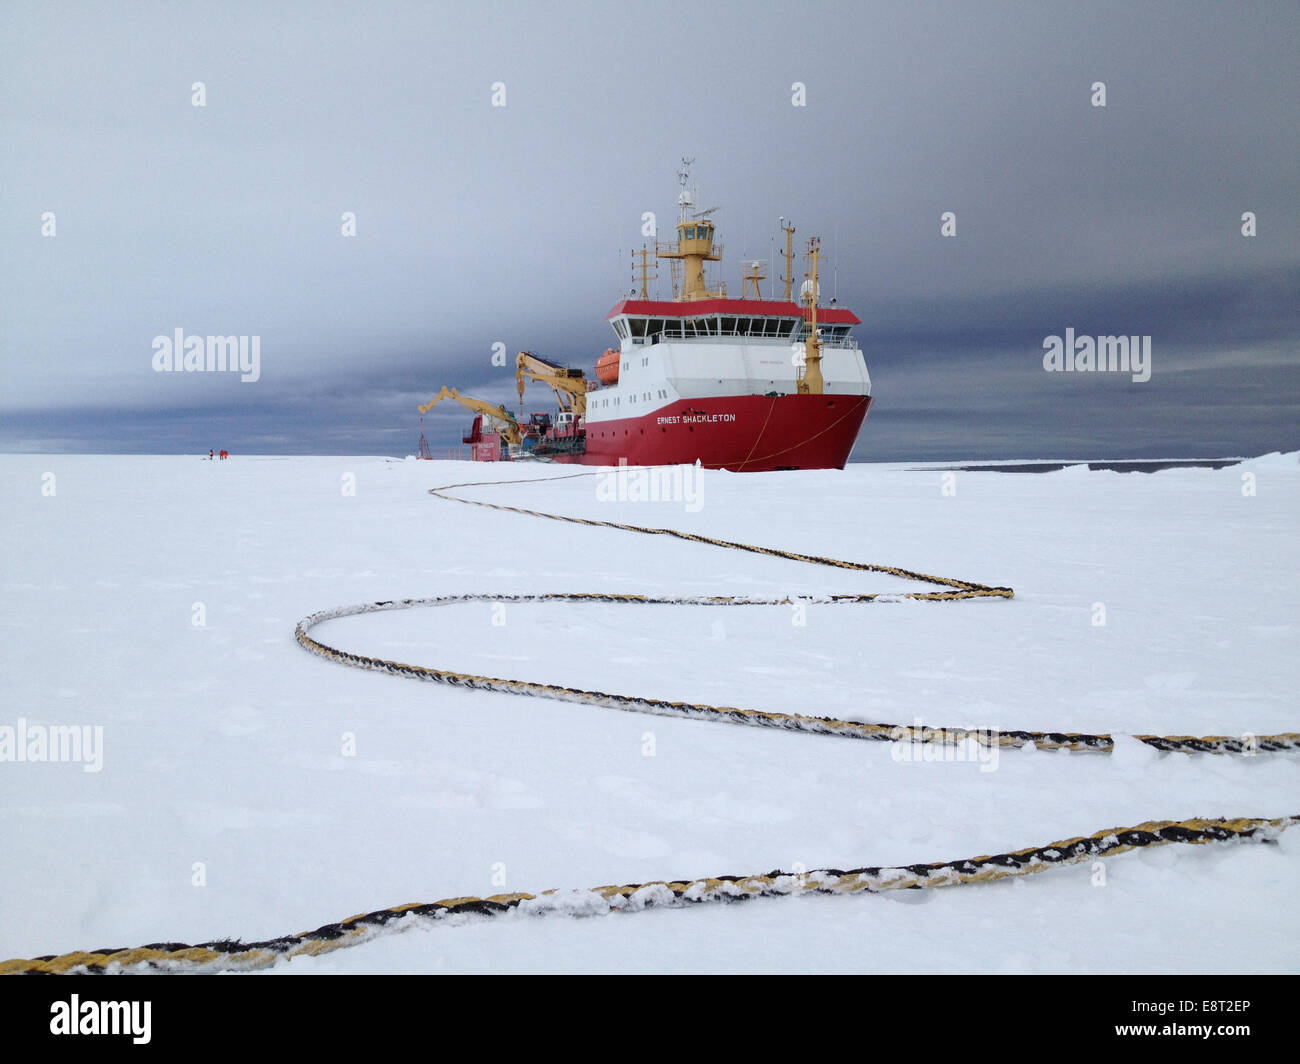 Arrival of the RRS Ernest Shackleton near Halley Research Station in Antarctica. The Shackleton is the regular resupply ship for the station and it also brought in some of the BARREL team scientists. The long tether is for the ship’s mooring. Stock Photo